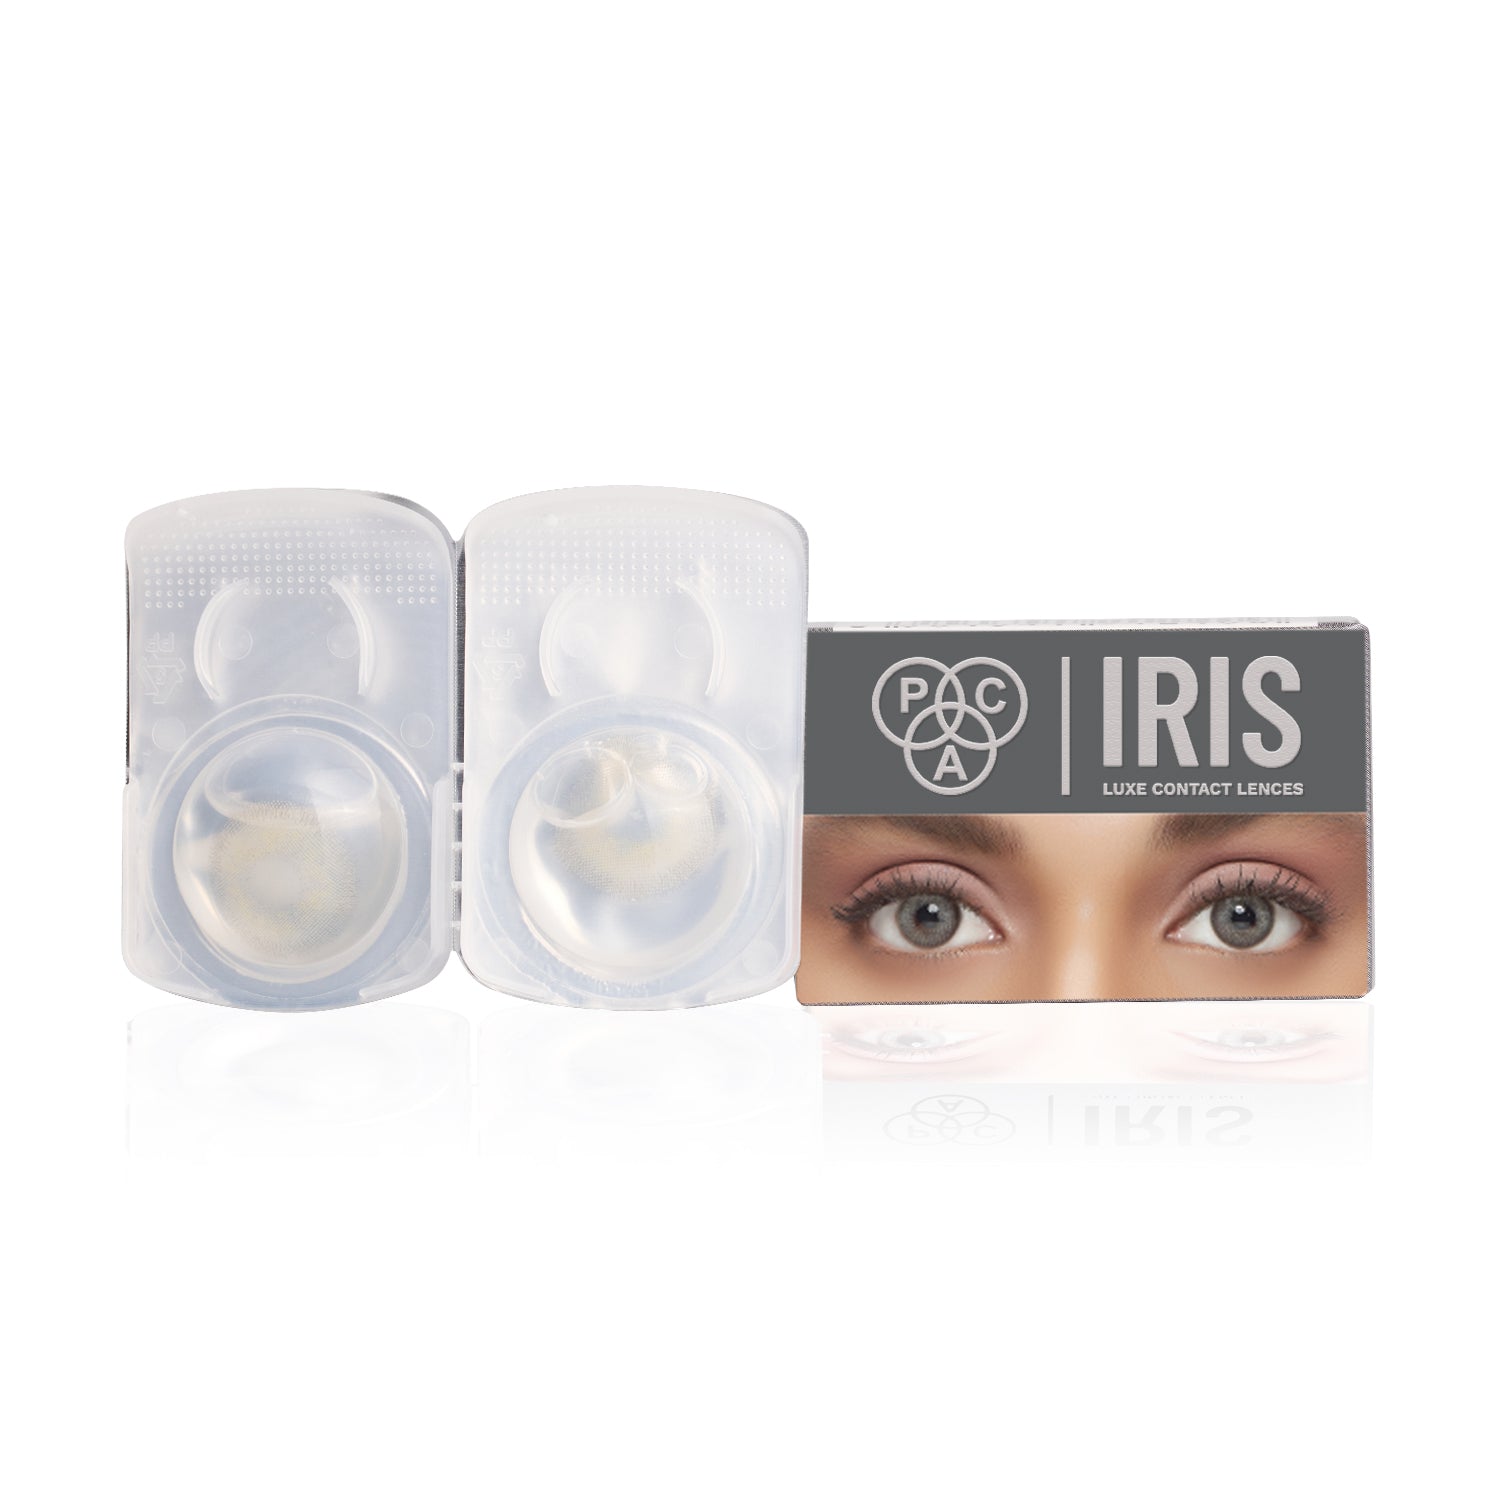 PAC Cosmetics IRIS LUXE Daily Lenses (1 Pair) #Color_Moonstone